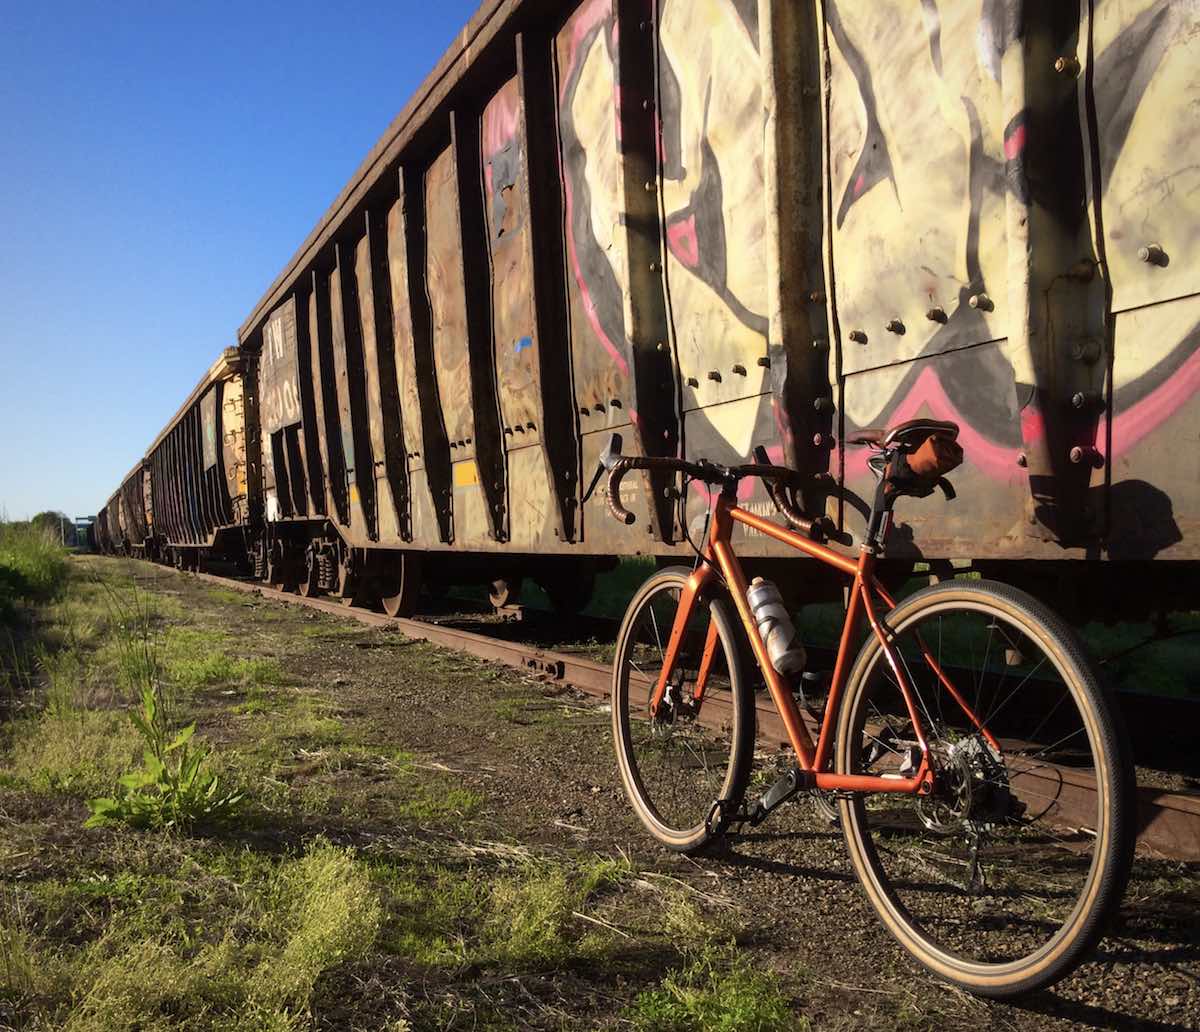 bikerumor pic of the day bicycle next to a stopped train with graffiti on it clear blue skies and green grass.